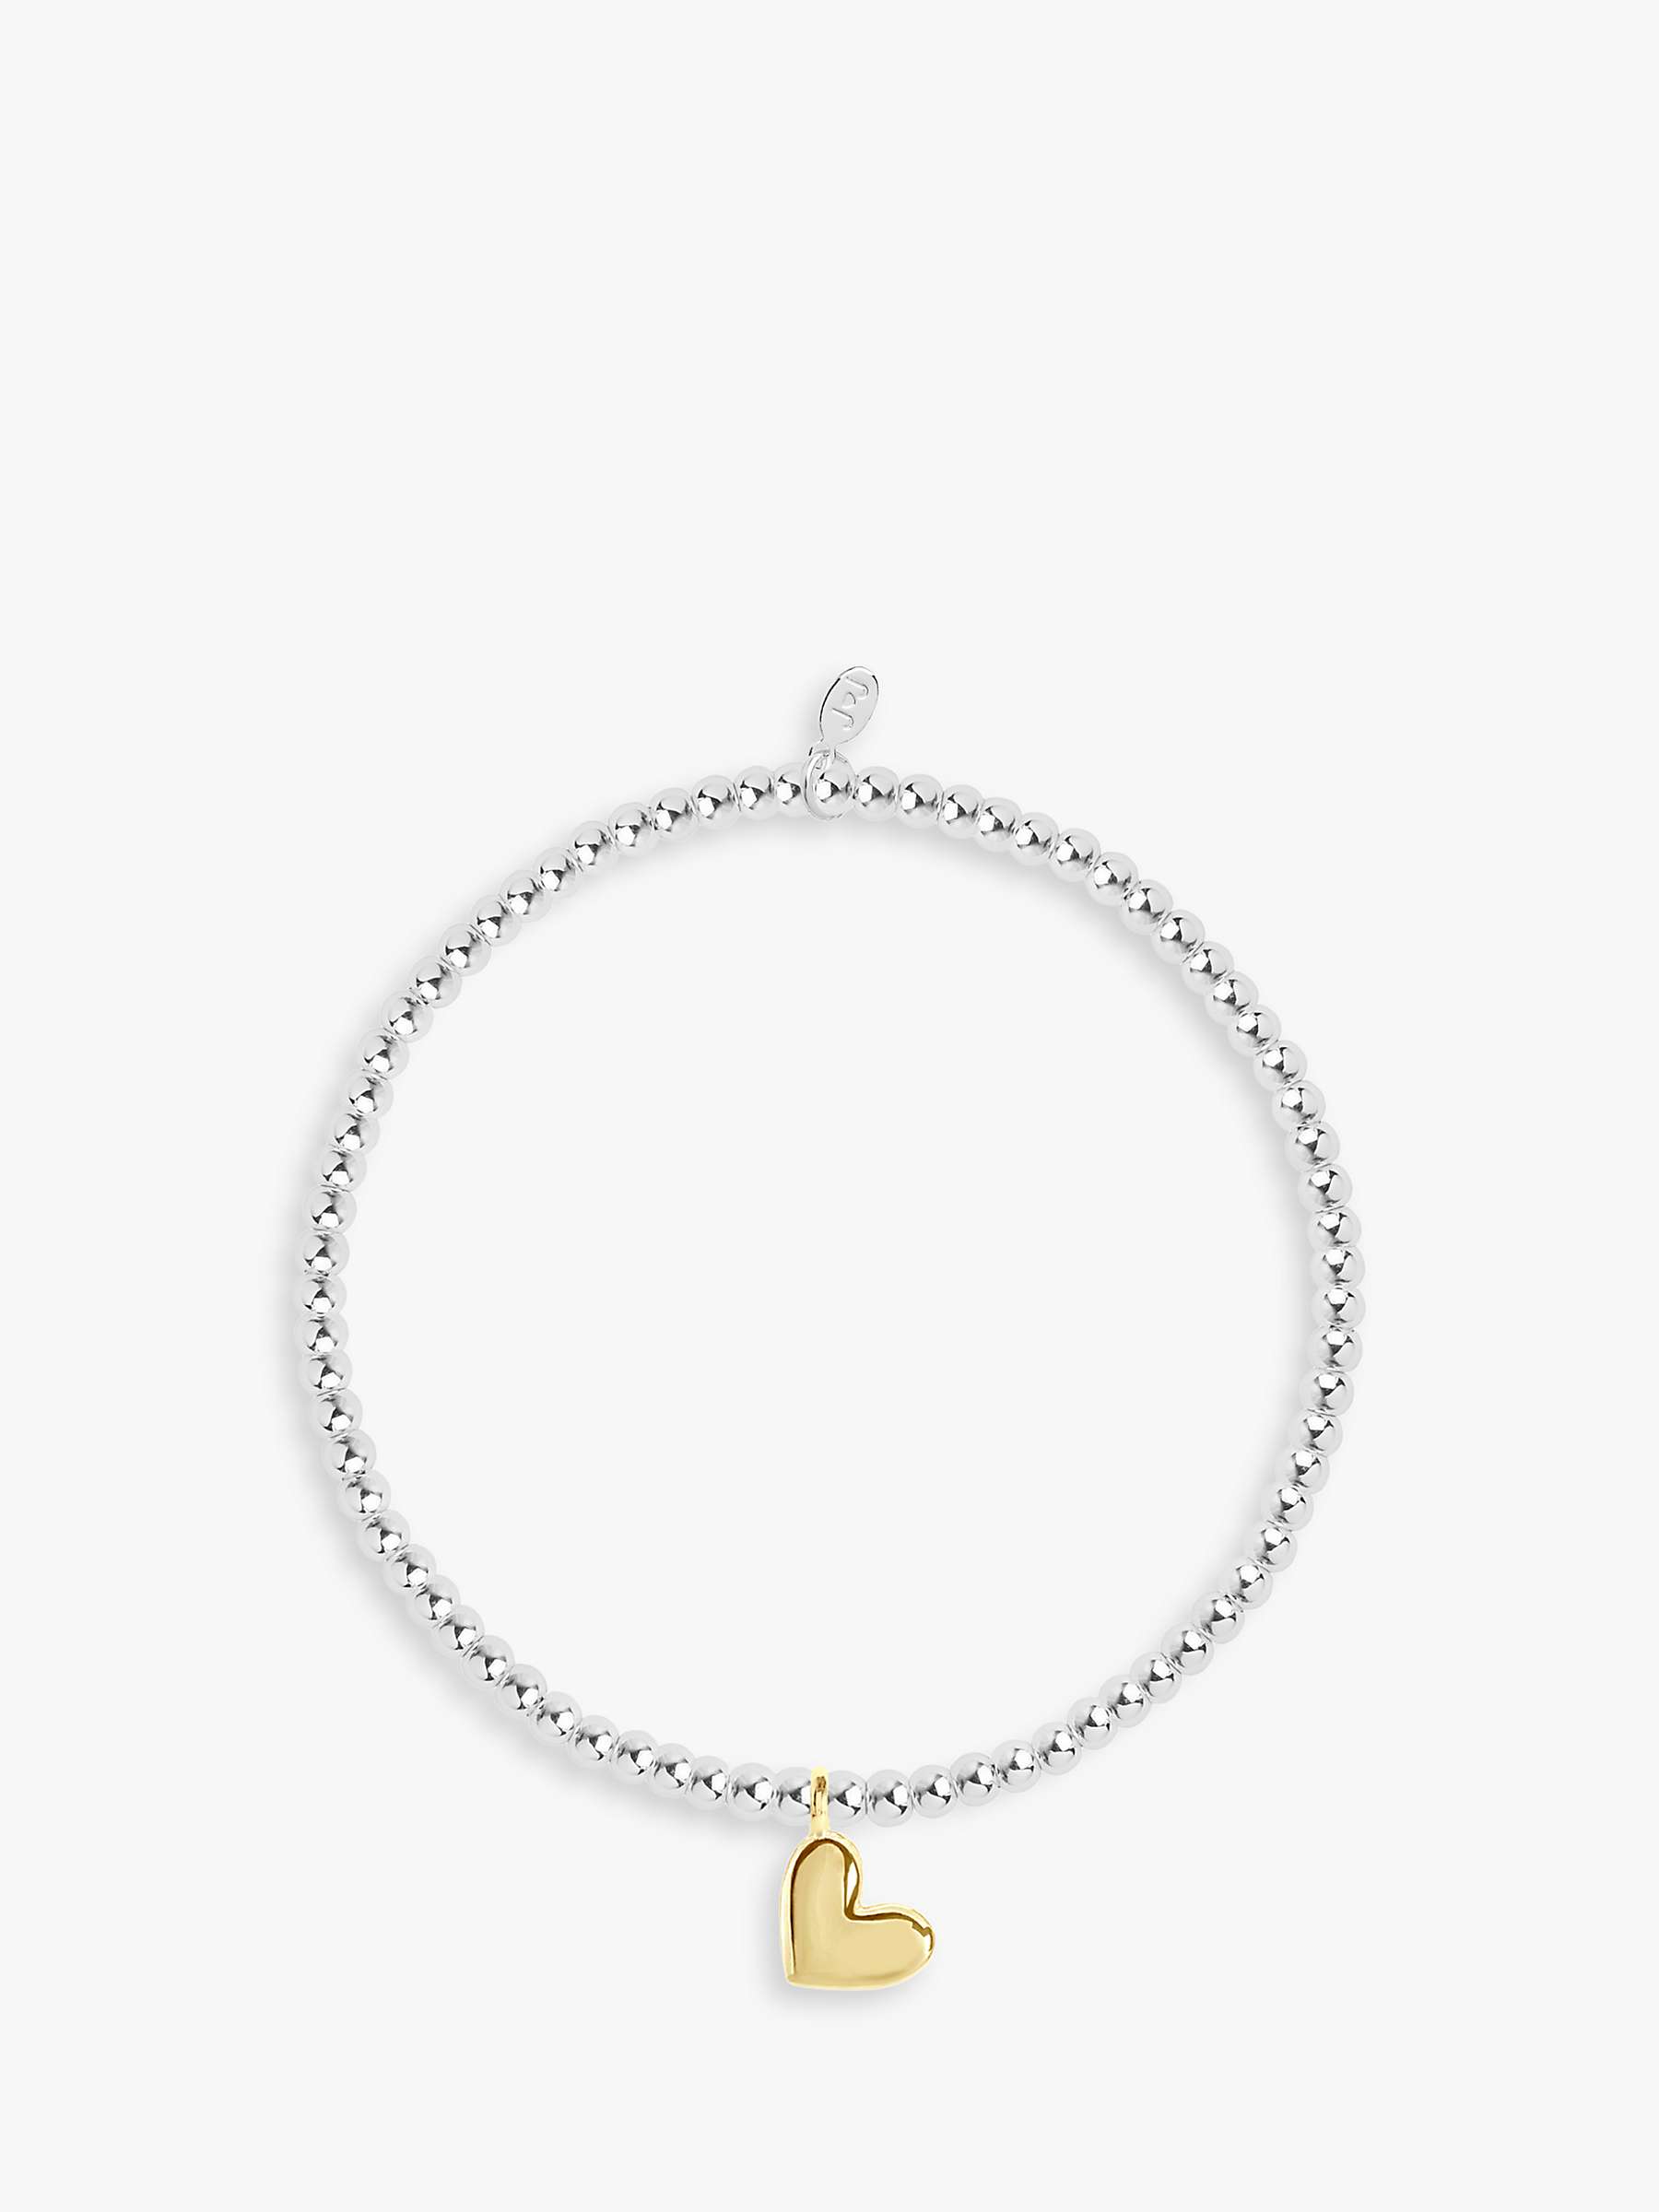 Buy Joma Jewellery A Little Heart of Gold Beaded Bracelet, Silver/Gold Online at johnlewis.com